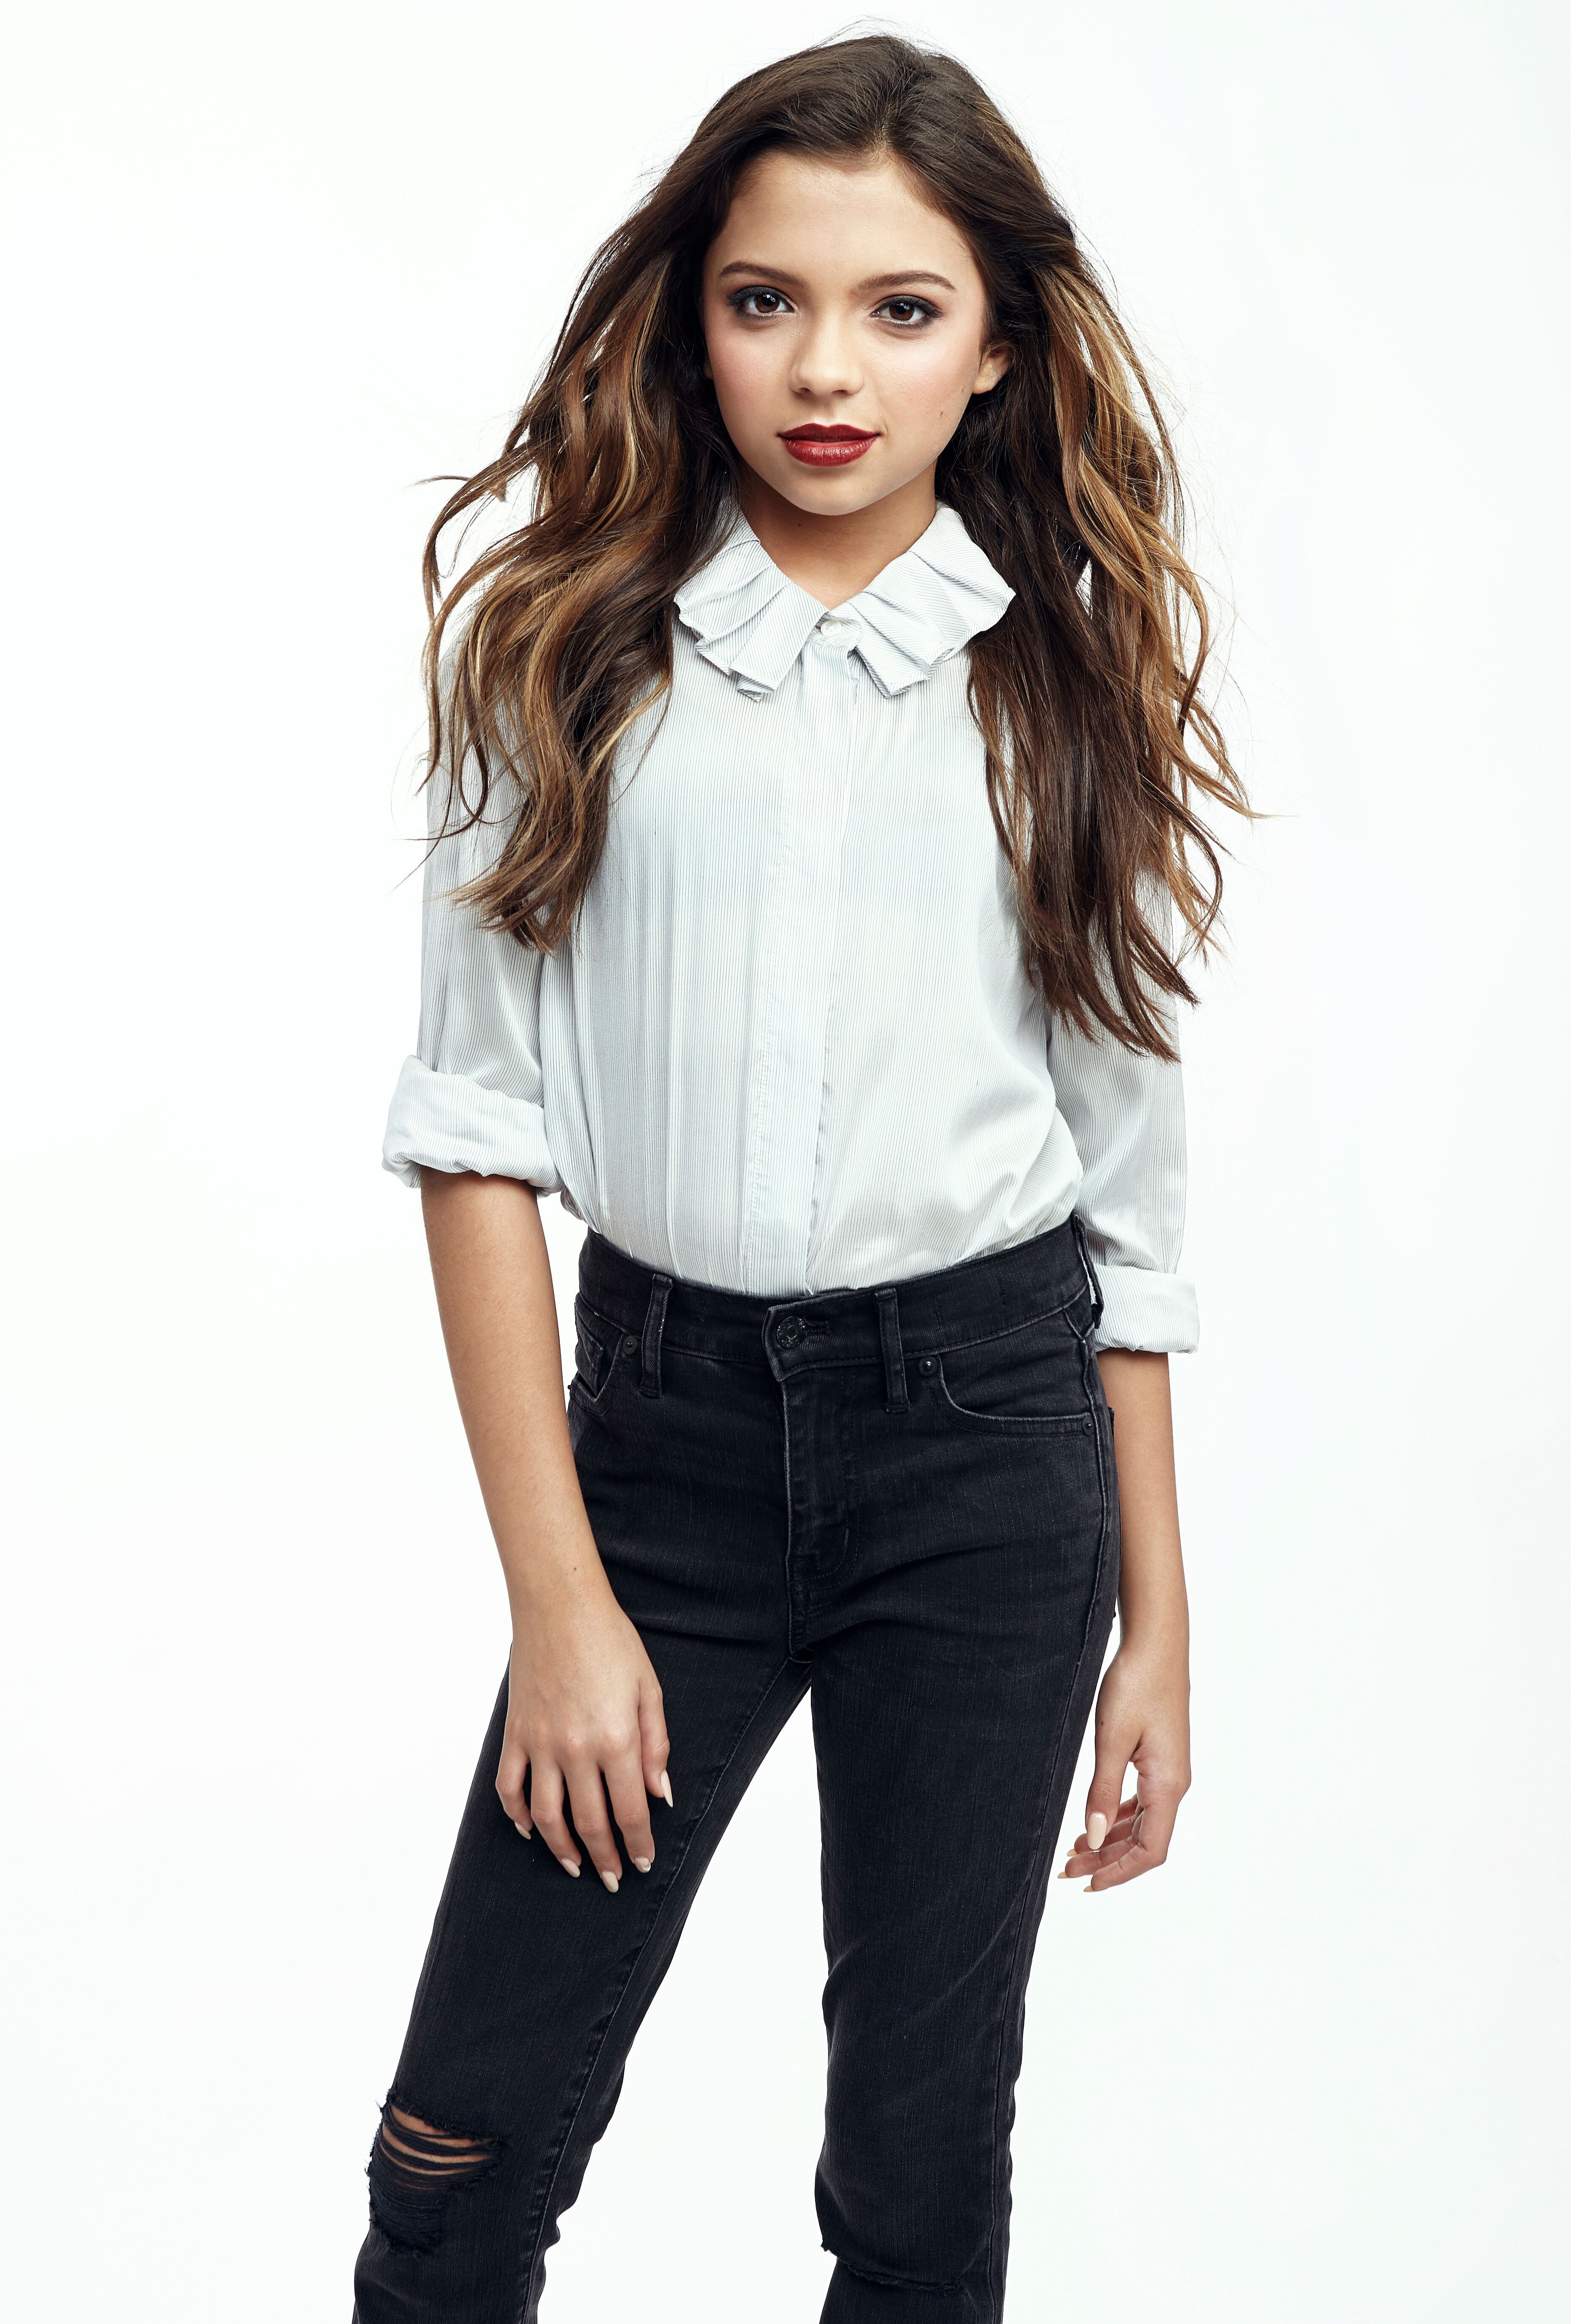 Cree Cicchino Age Height, Boyfriend, Twin Sister, Parents